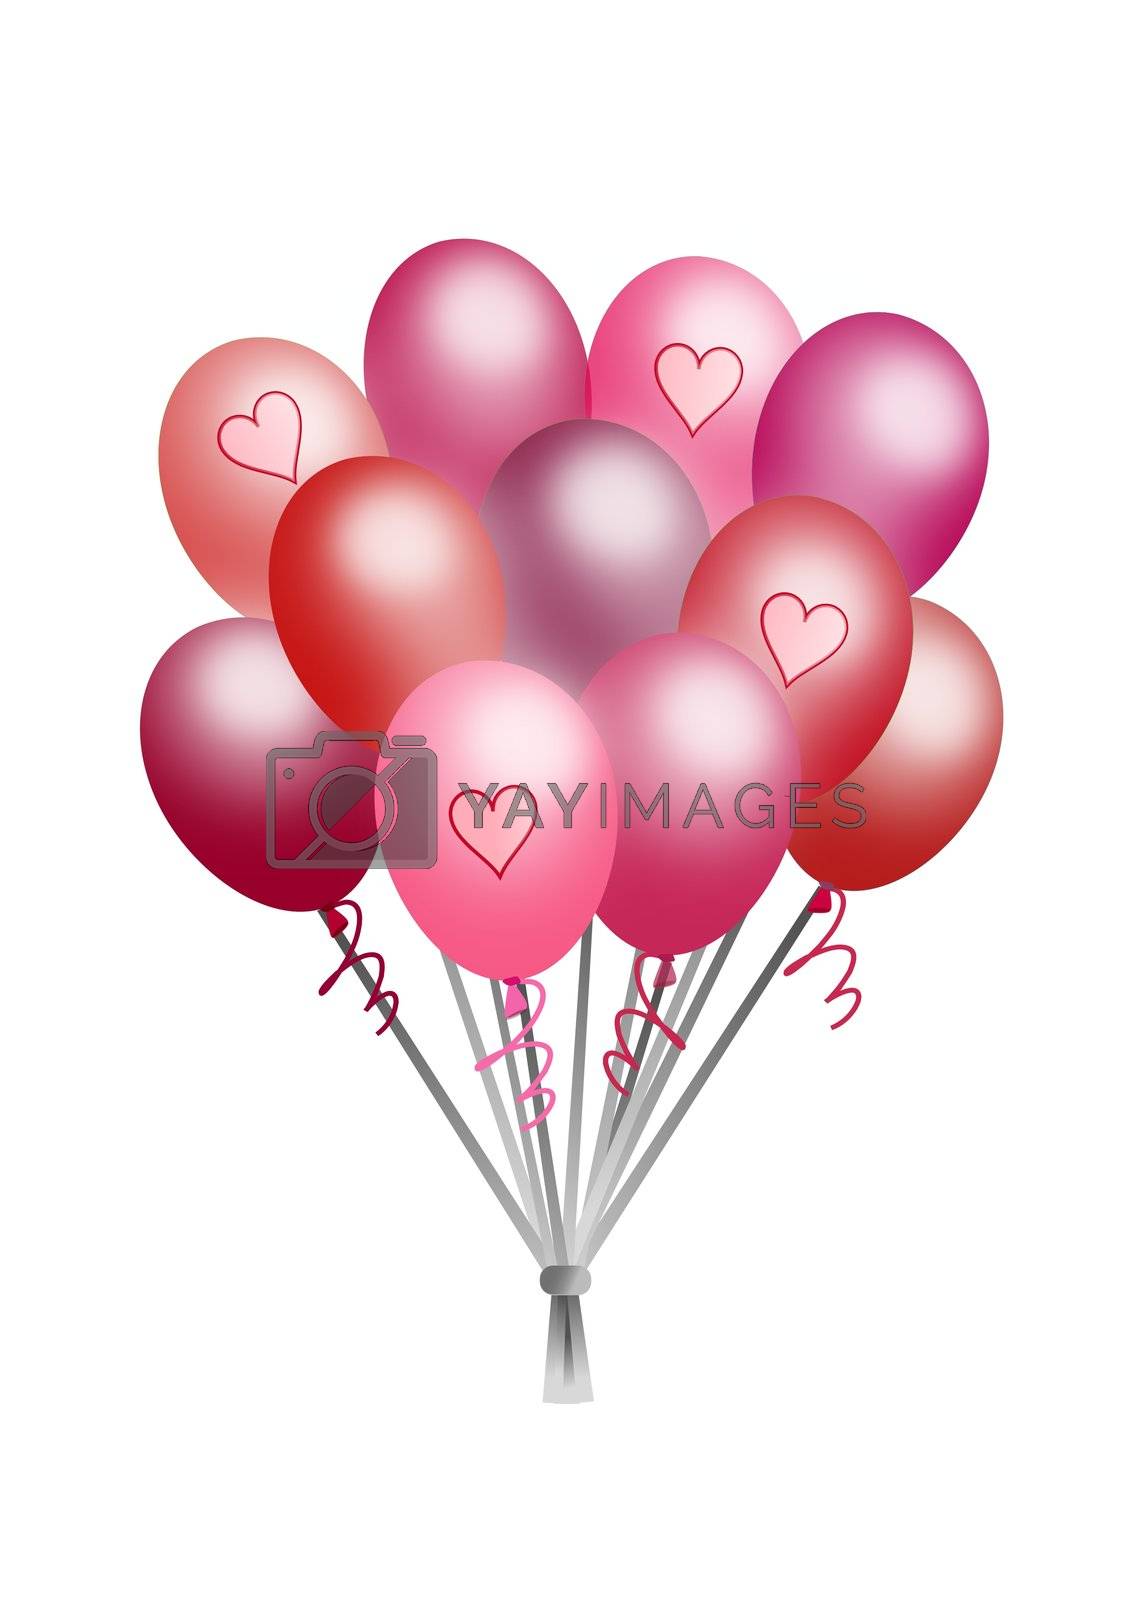 Royalty free image of Valentine Balloons by Bluesmoke